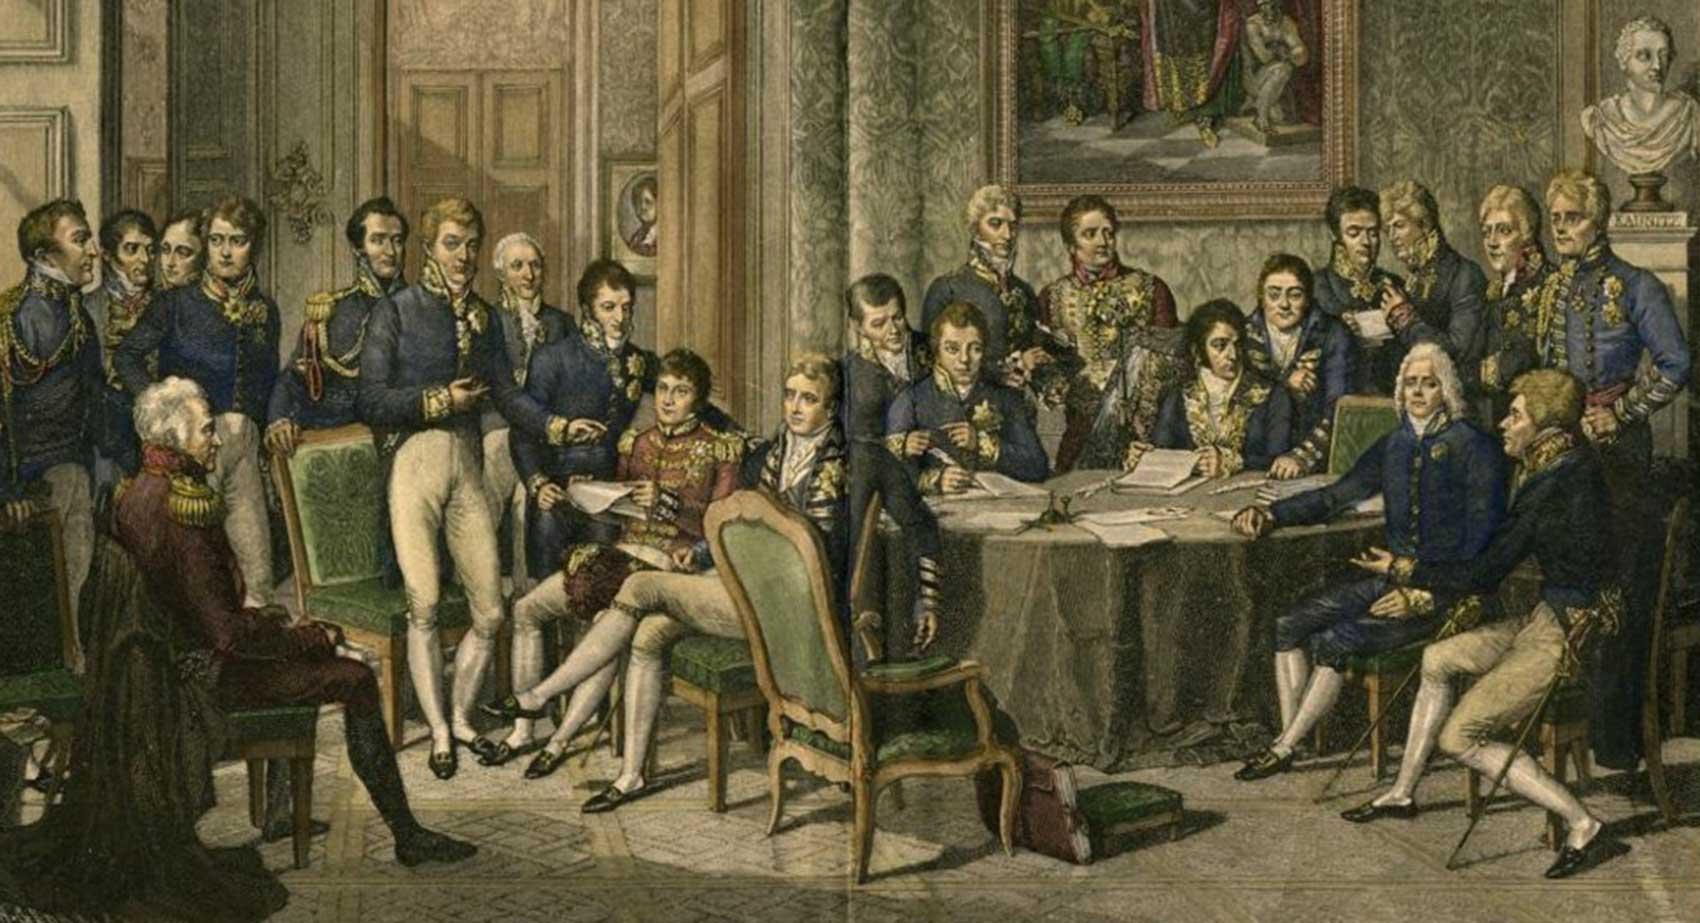 Colored engraving of 23 men at the Vienna Congress